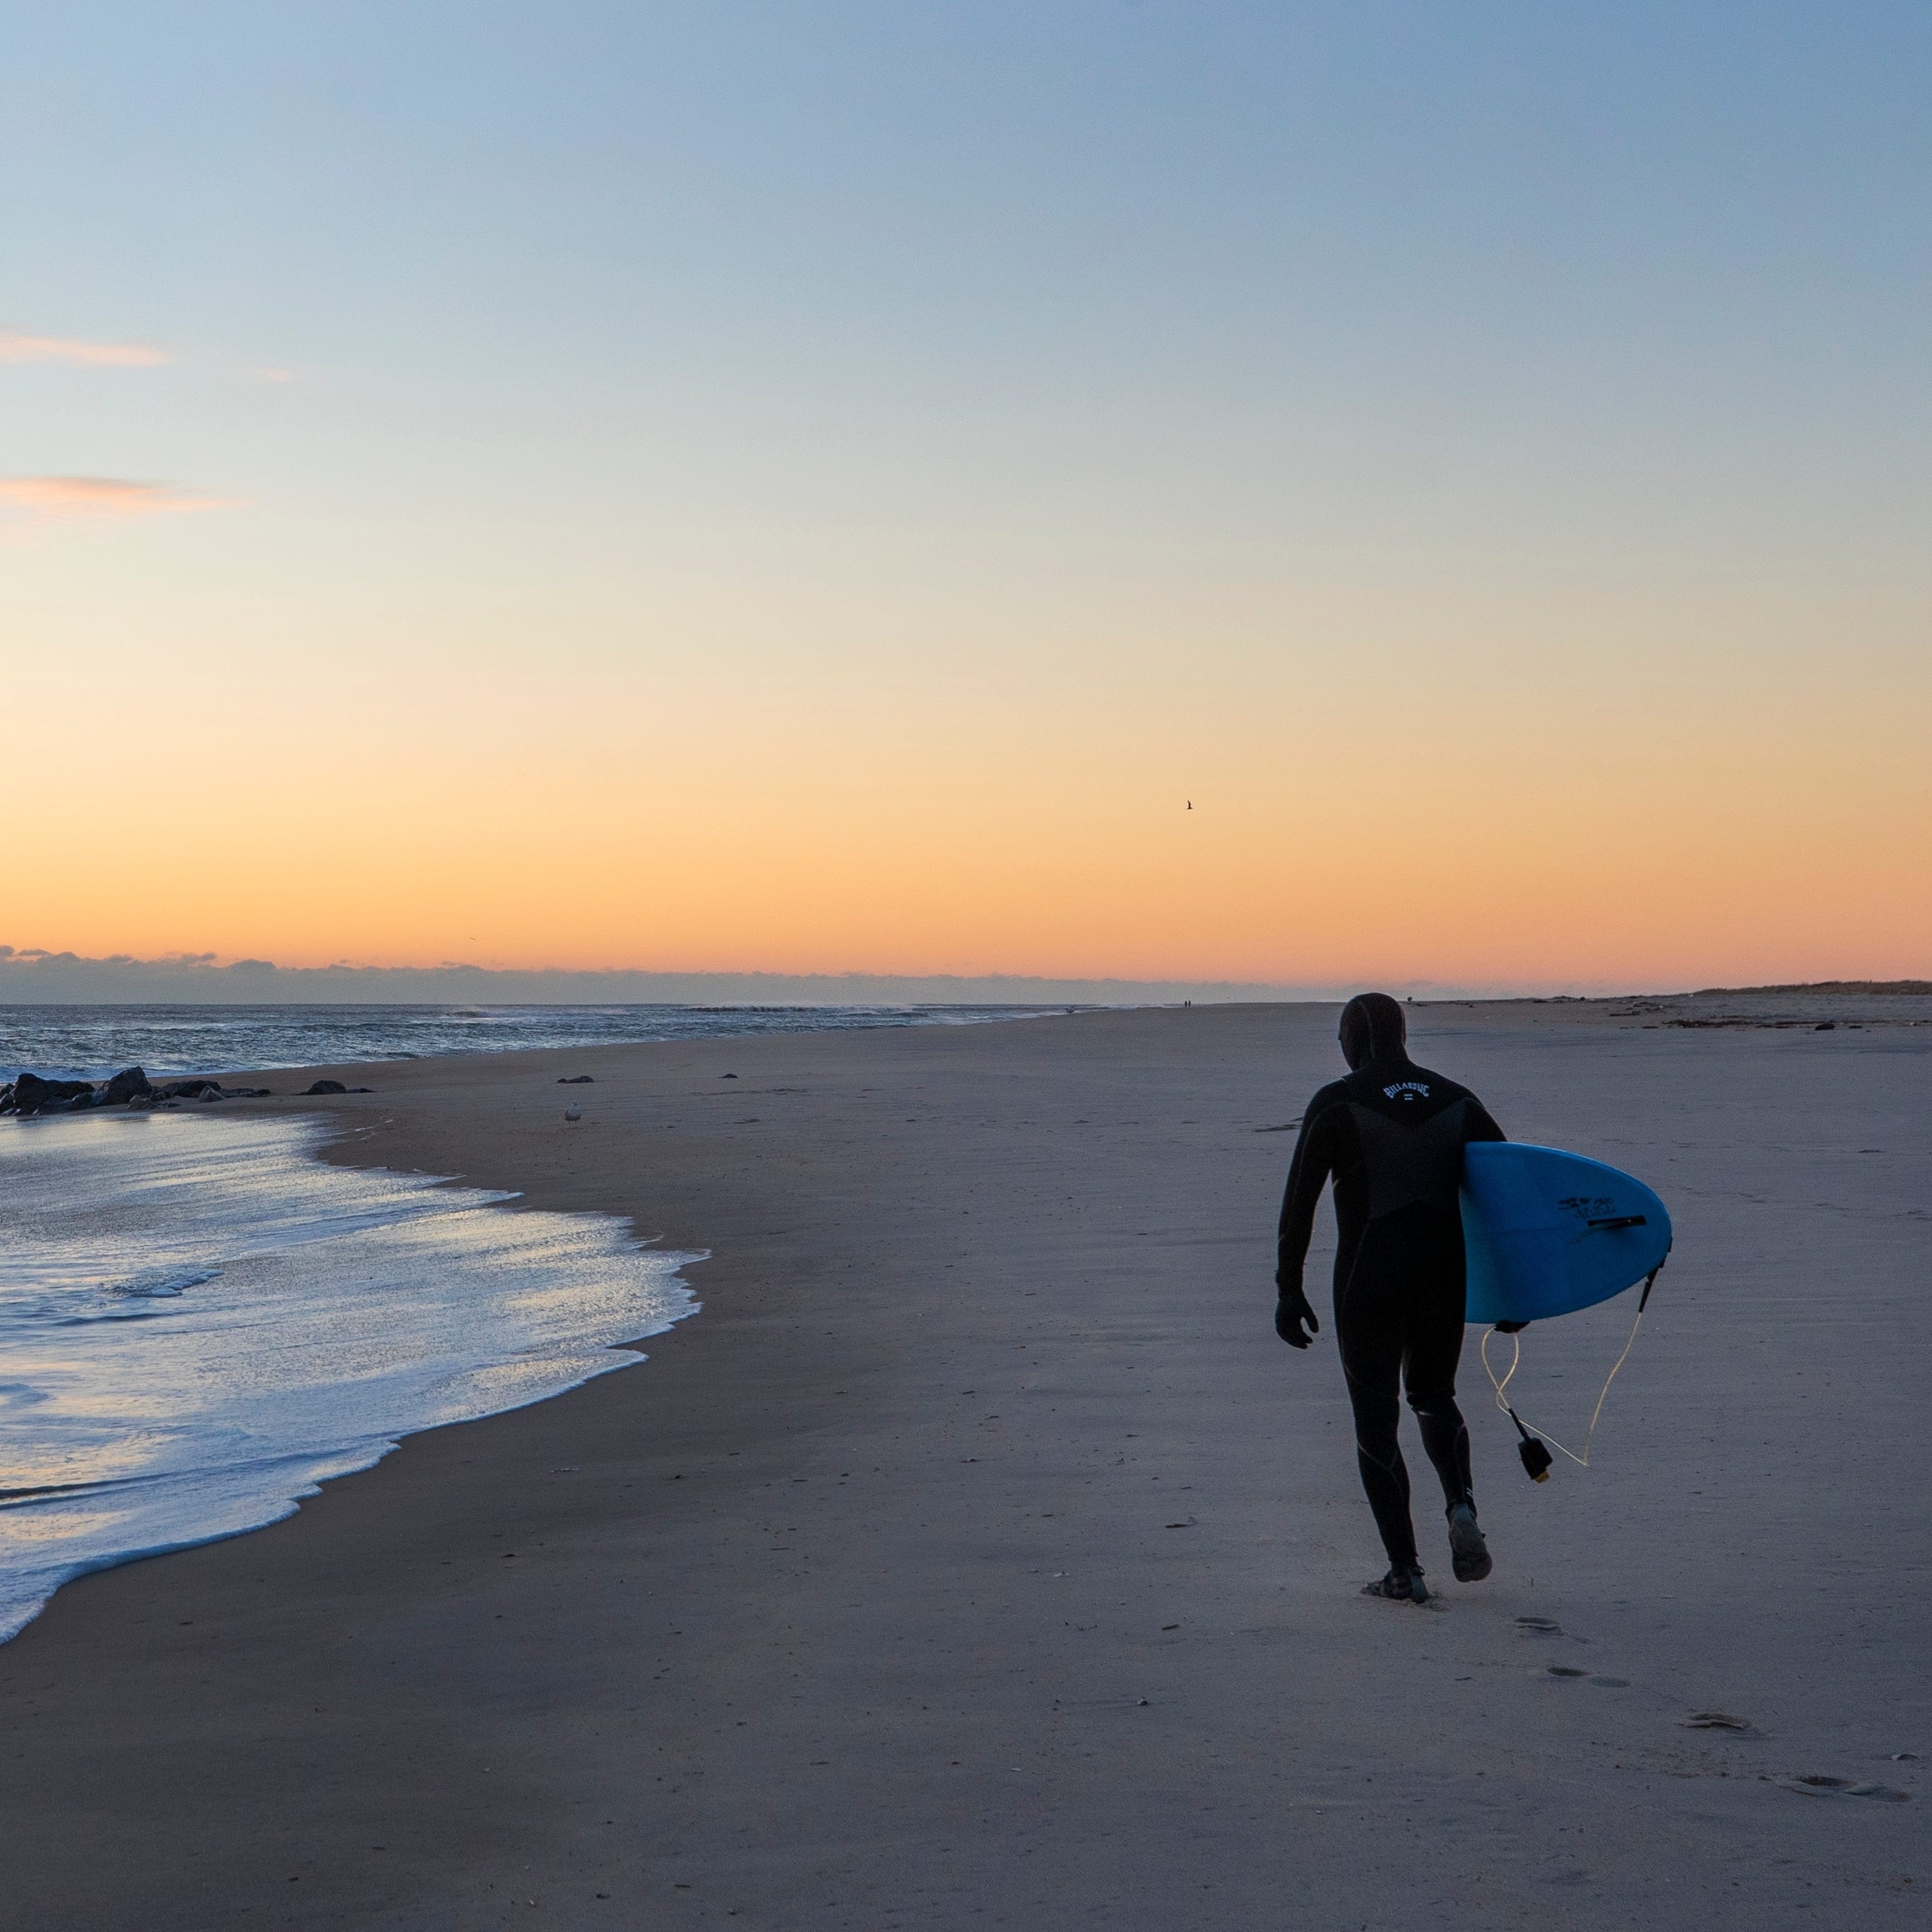 
A surfer heads out at Gateway National Recreation Area in Sandy Hook.